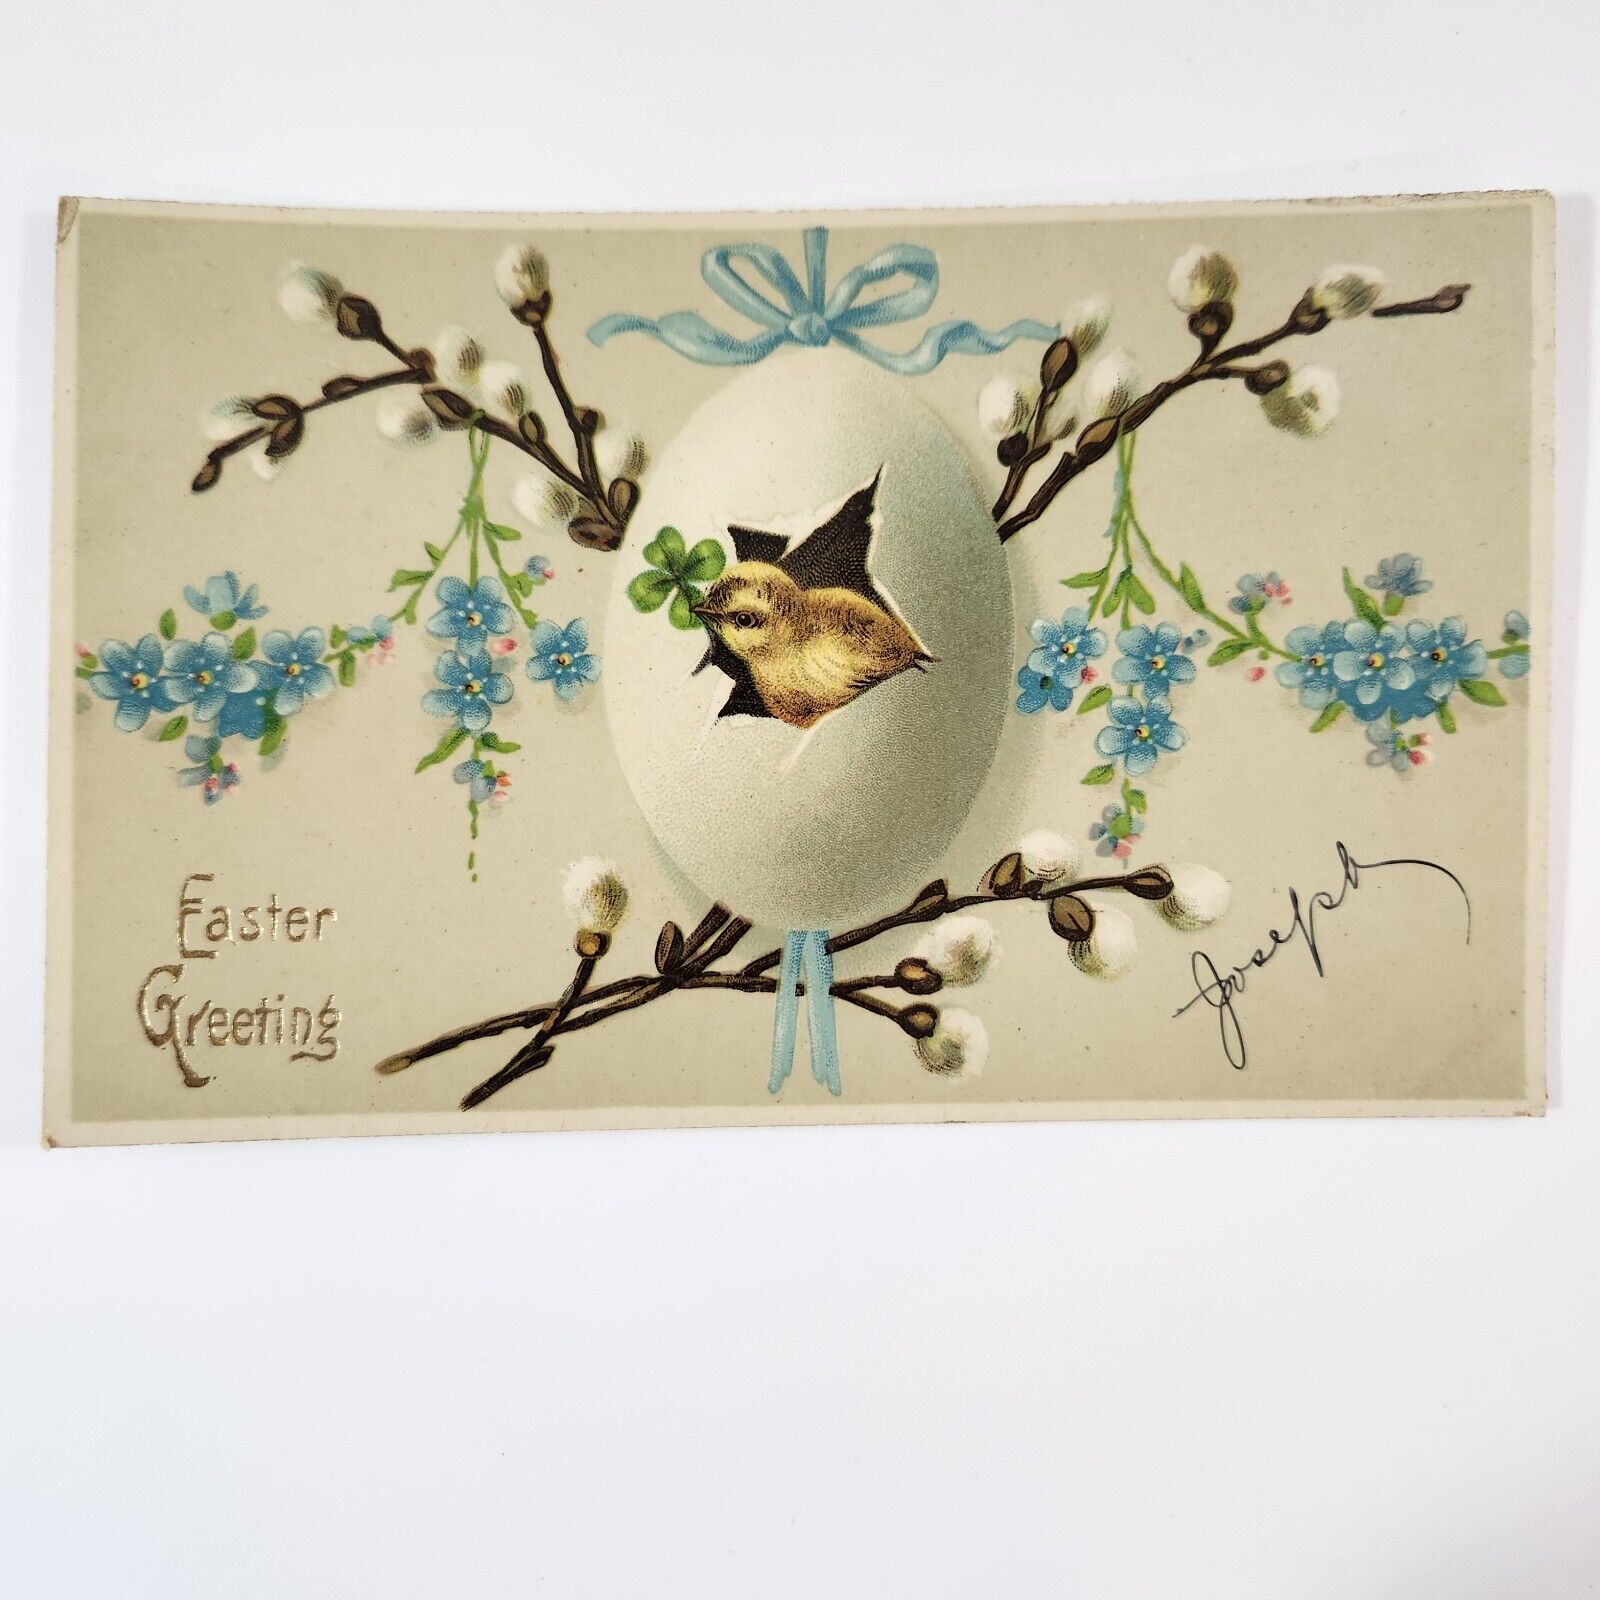 Easter Greetings Chick In Egg, 1900s, Made In Germany Vintage Postcard